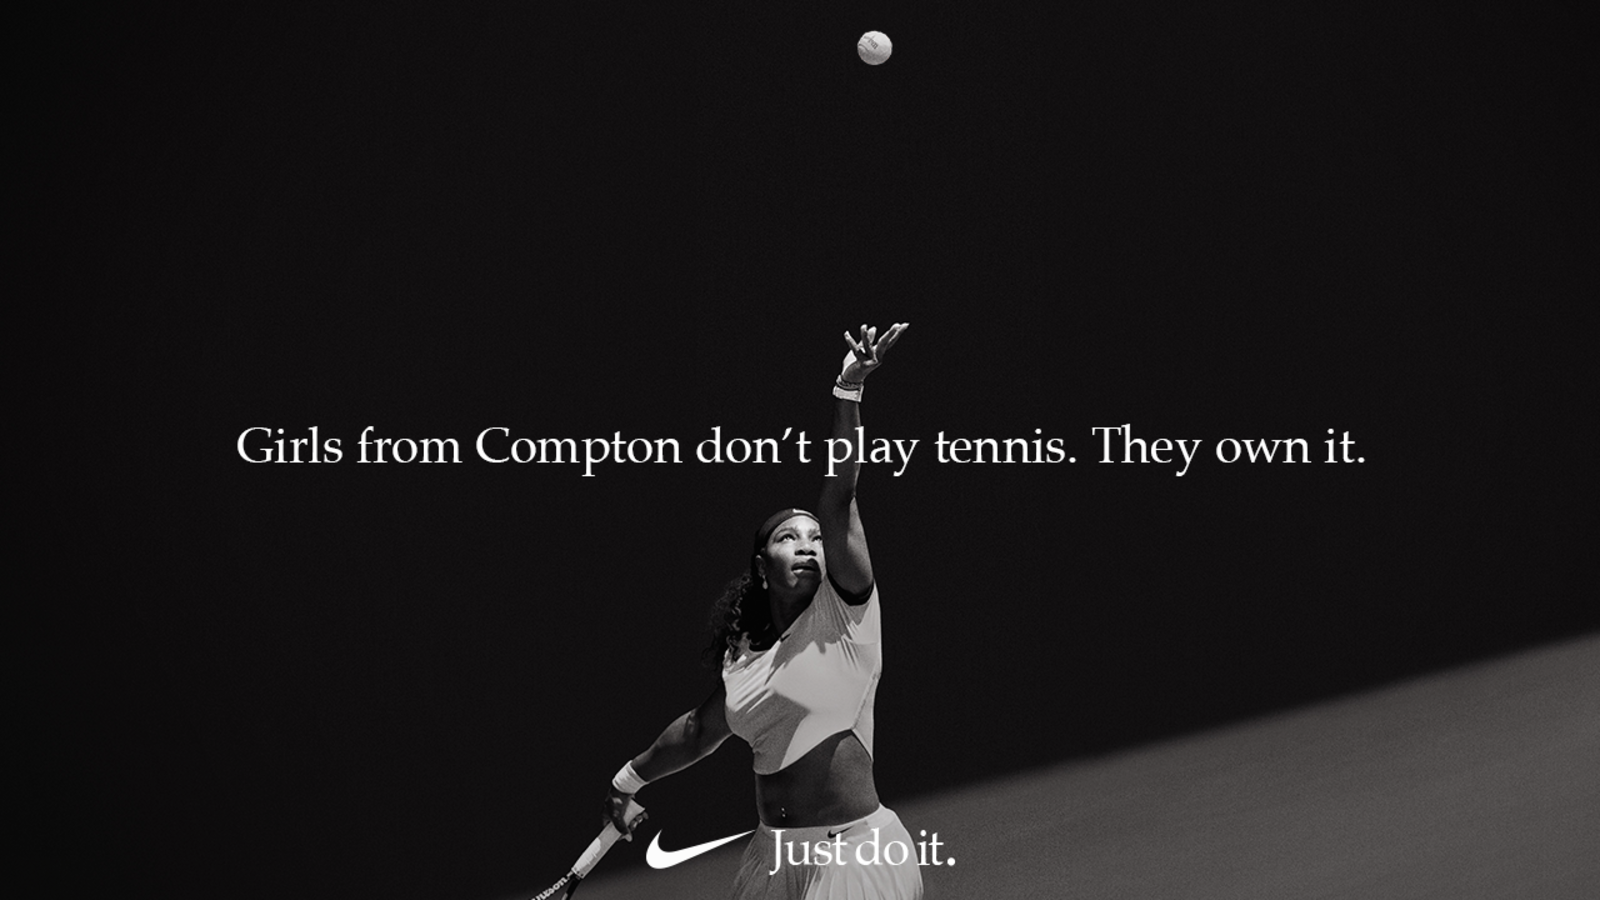 Image source: Nike's 2018 'Just do it' campaign.